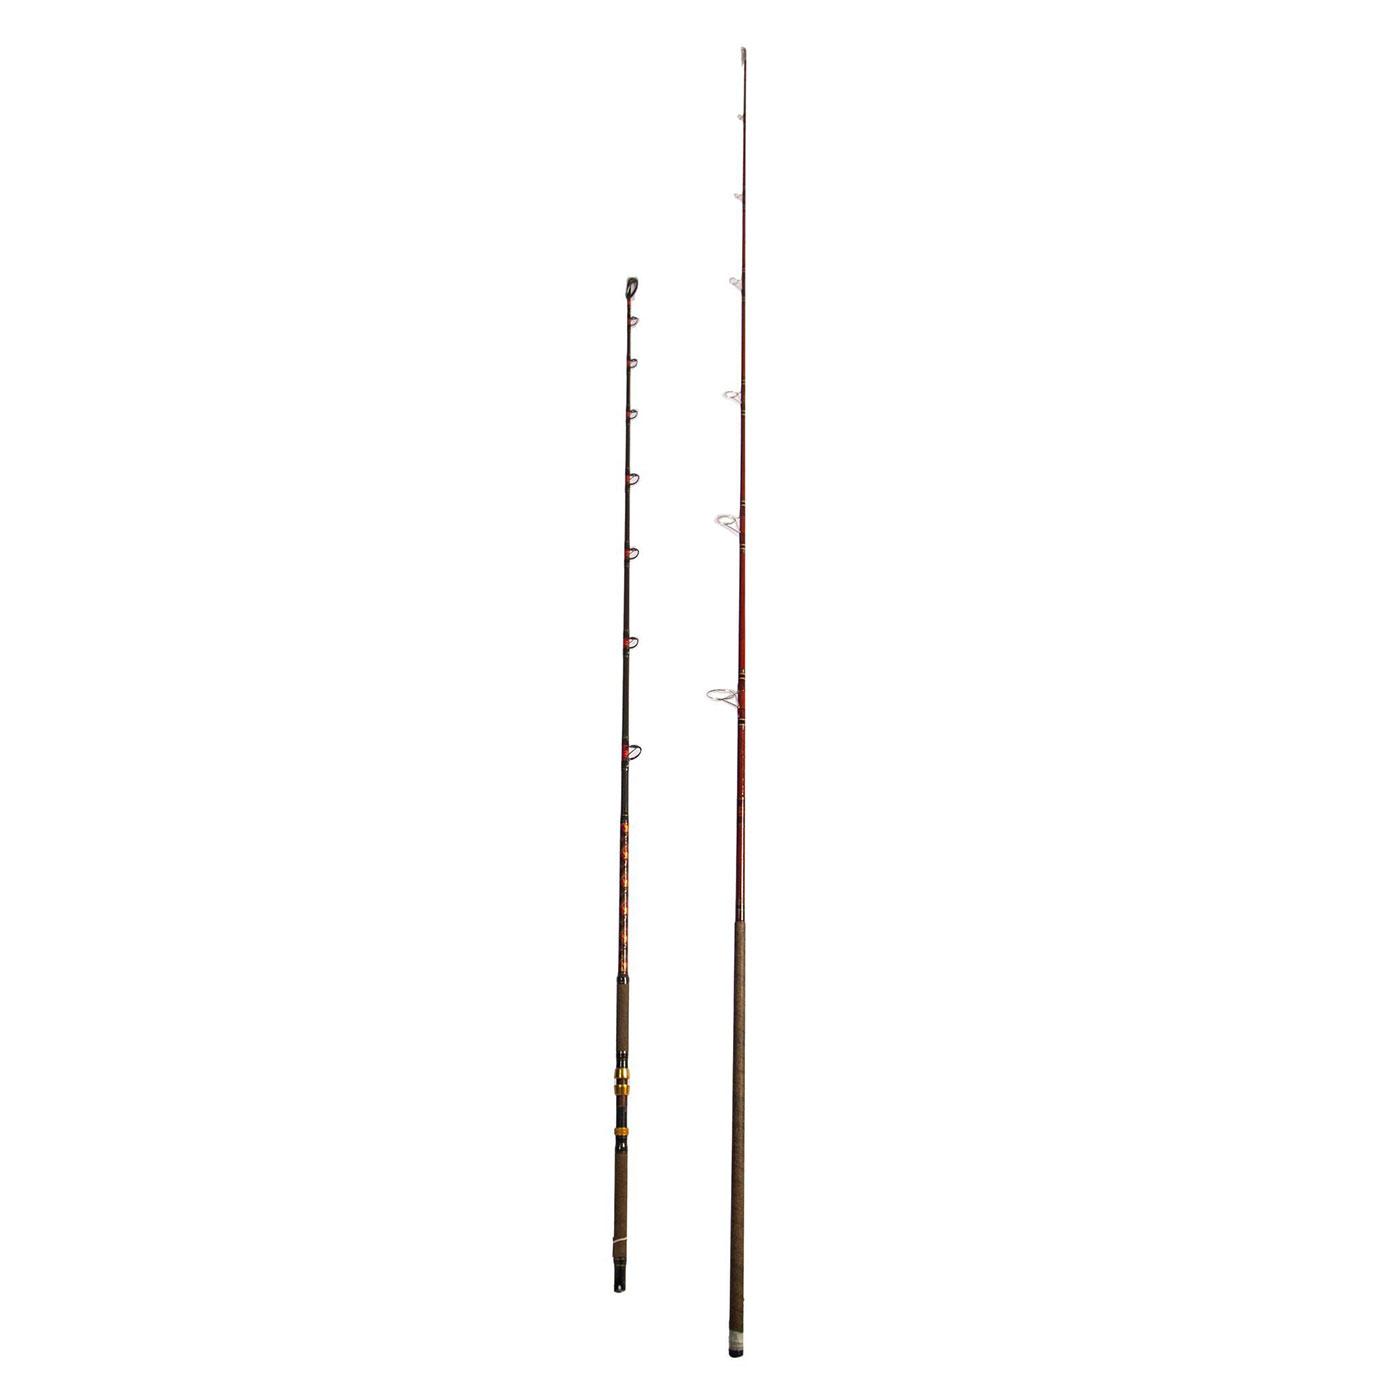 Pair of Vintage Boat Rods Medium and Heavy Power 7-8 Ft.